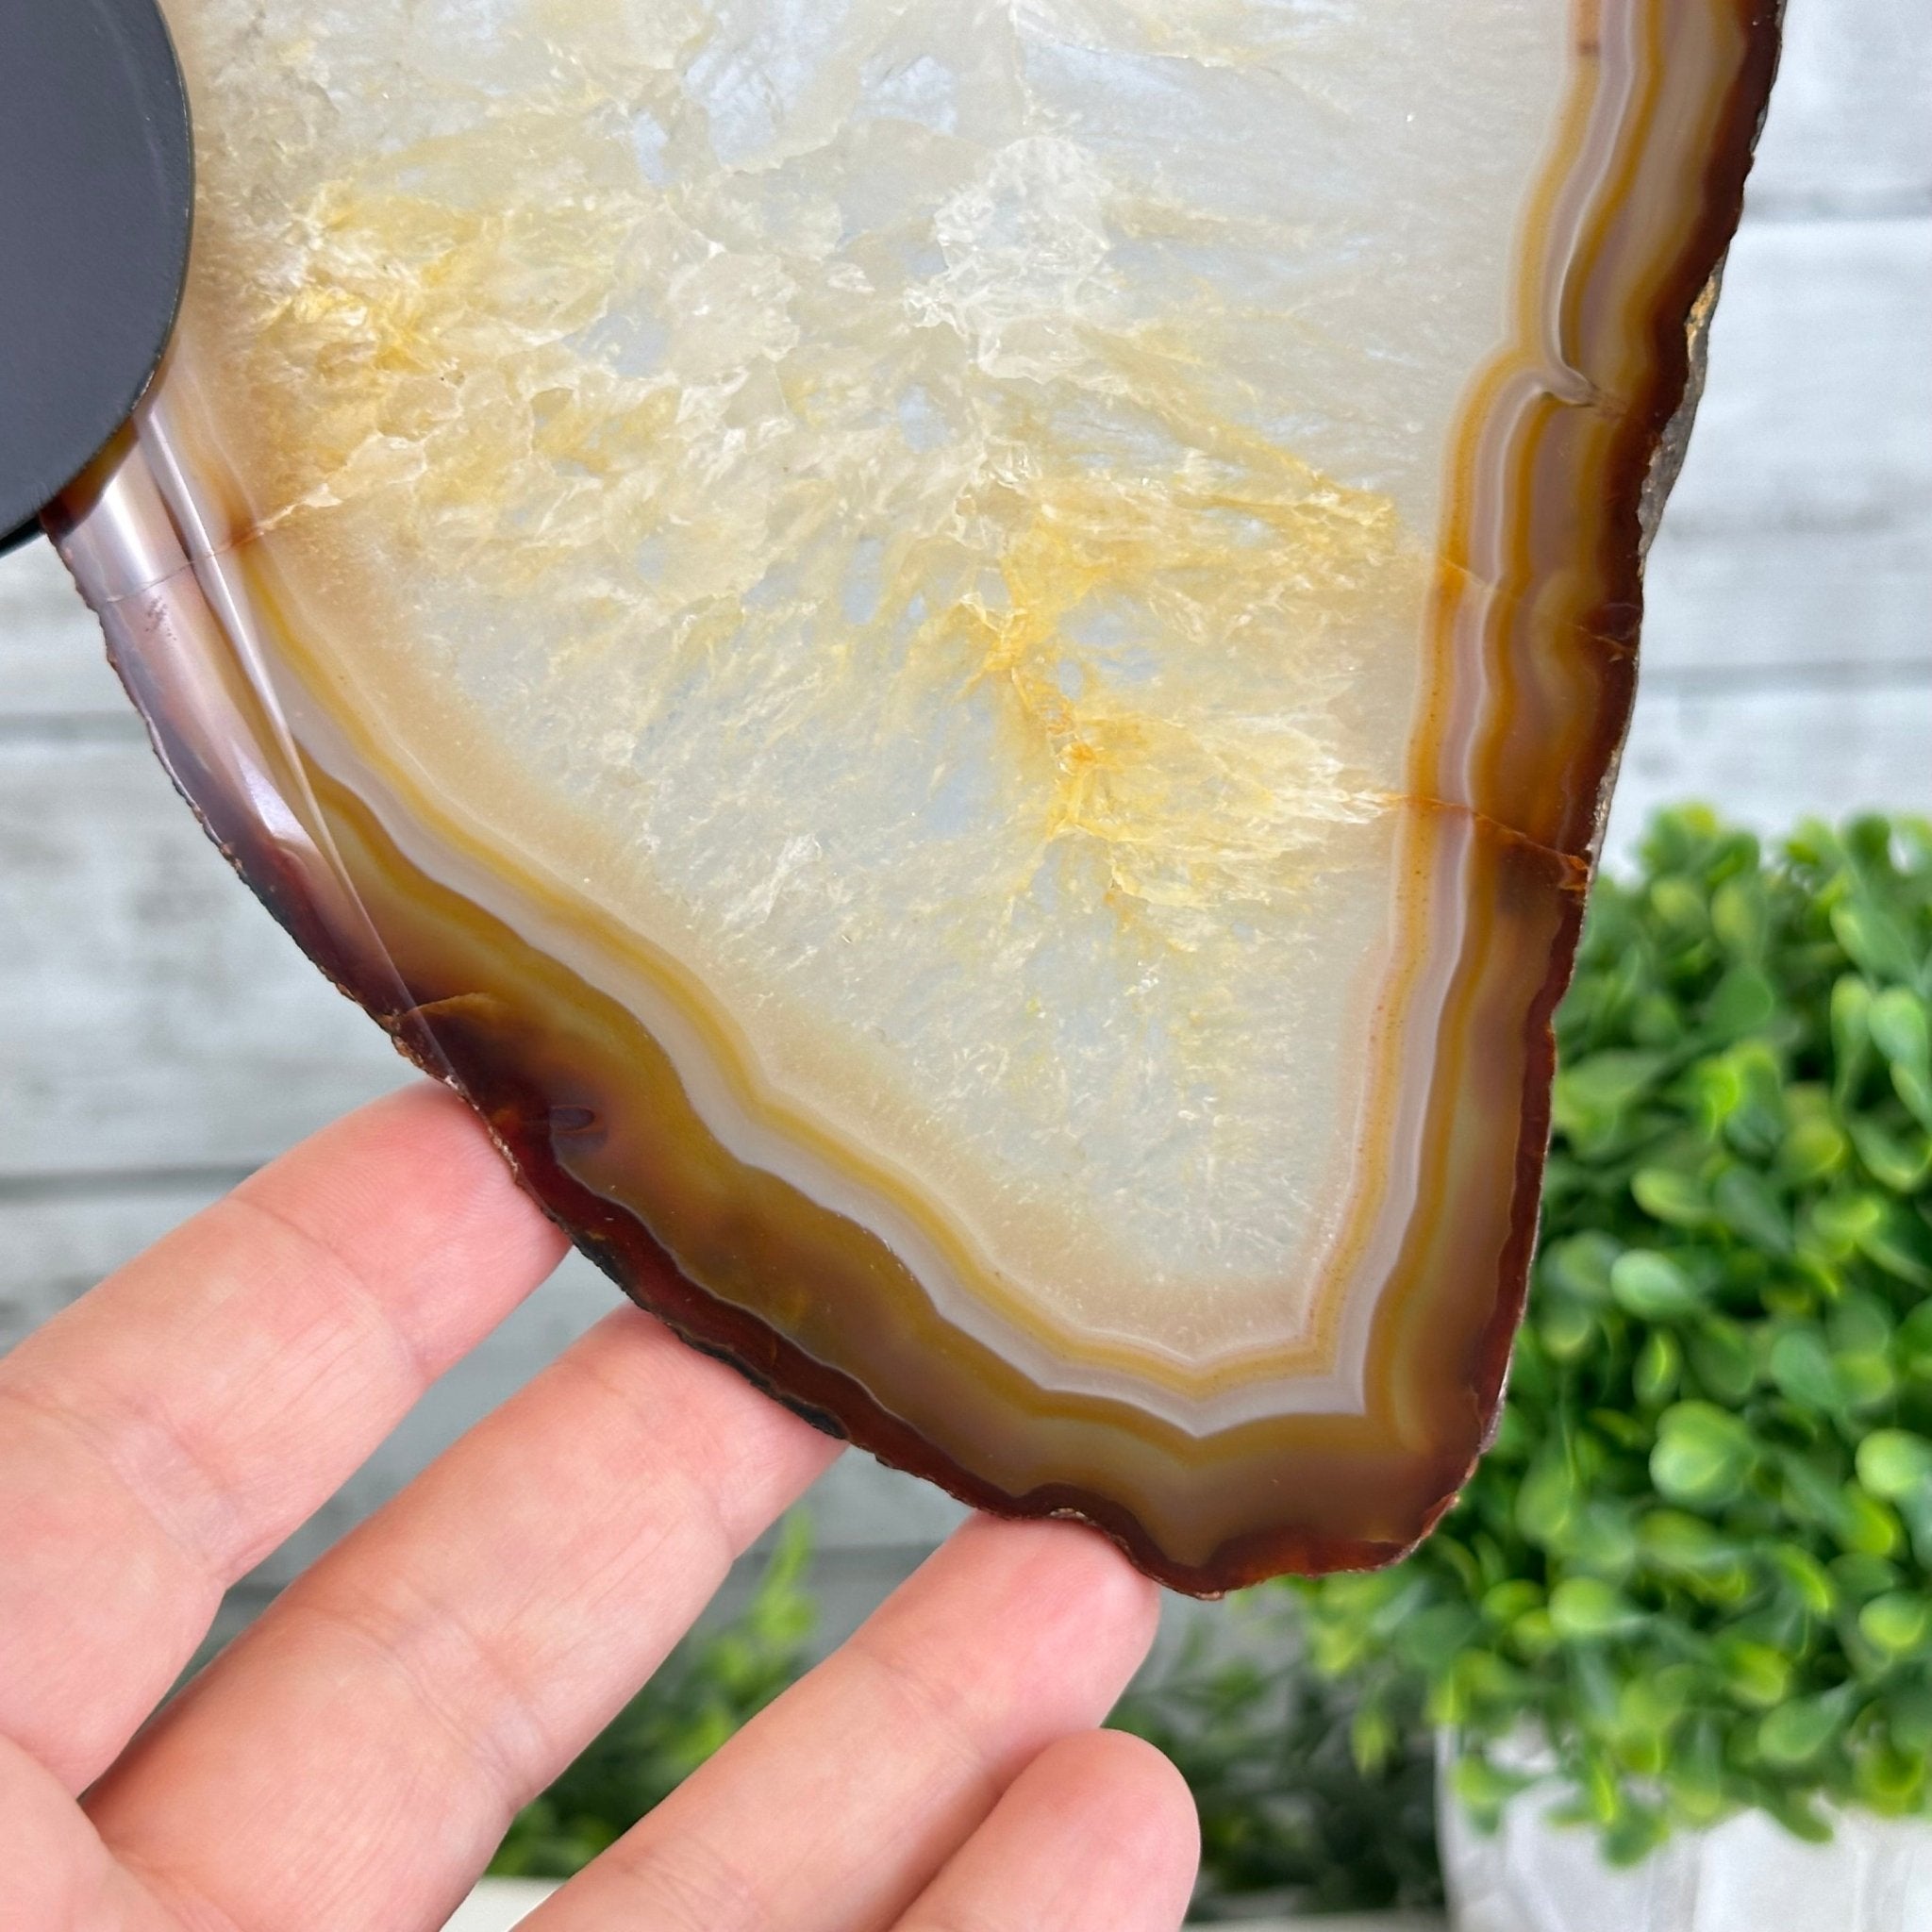 Natural Brazilian Agate "Butterfly Wings", 14.2" Tall #5050NA-080 - Brazil GemsBrazil GemsNatural Brazilian Agate "Butterfly Wings", 14.2" Tall #5050NA-080Agate Butterfly Wings5050NA-080